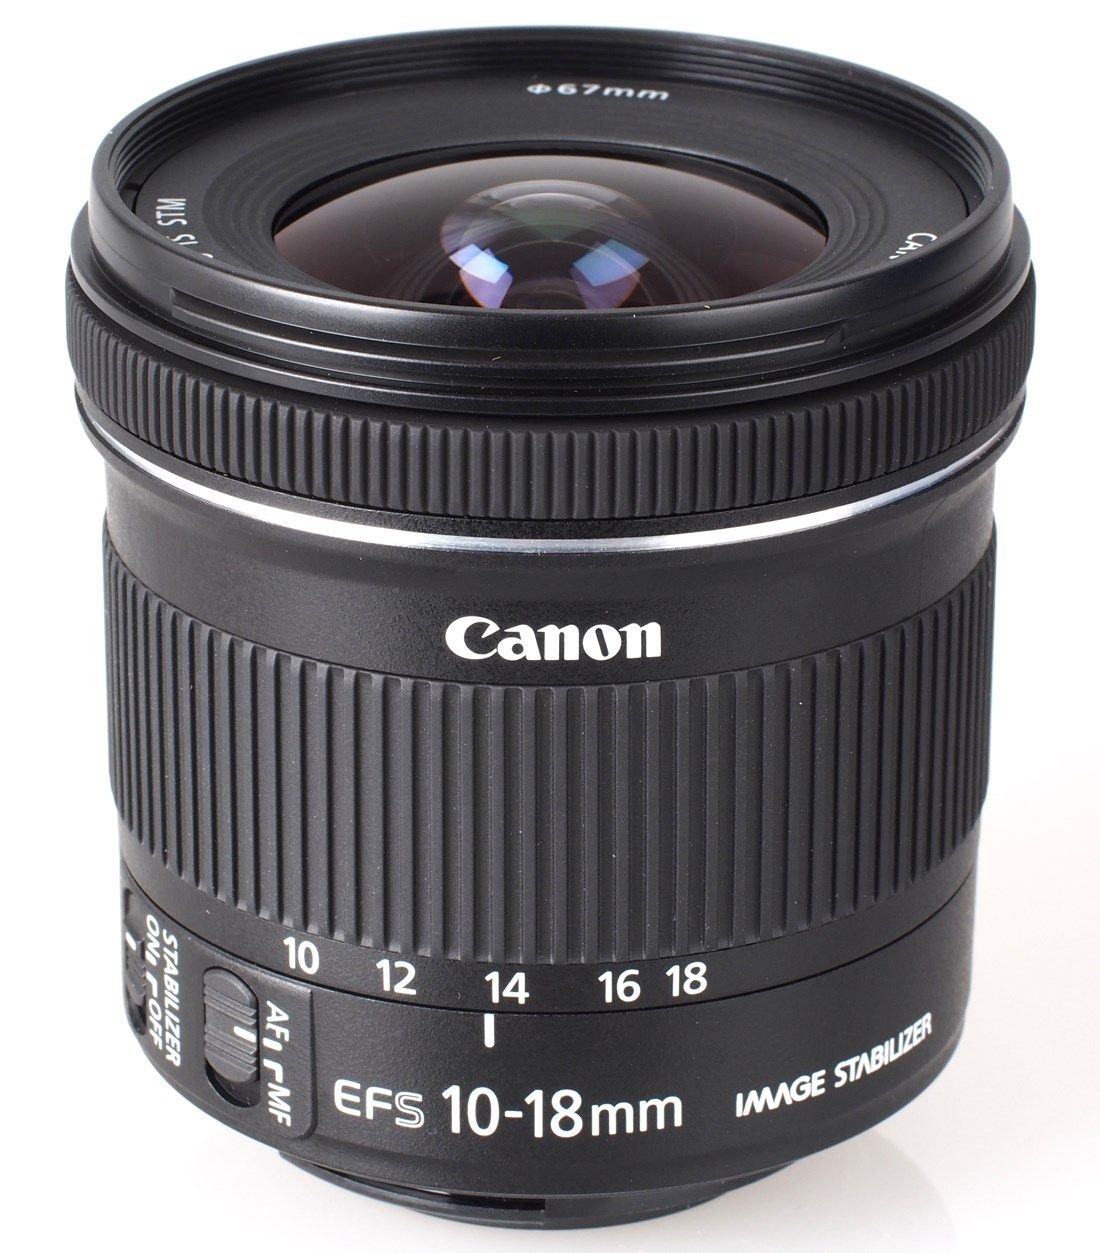 Canon EF-S 10-18mm f4.5-5-6 IS STM Lens - Product Photo 2 - Alternative side perspective